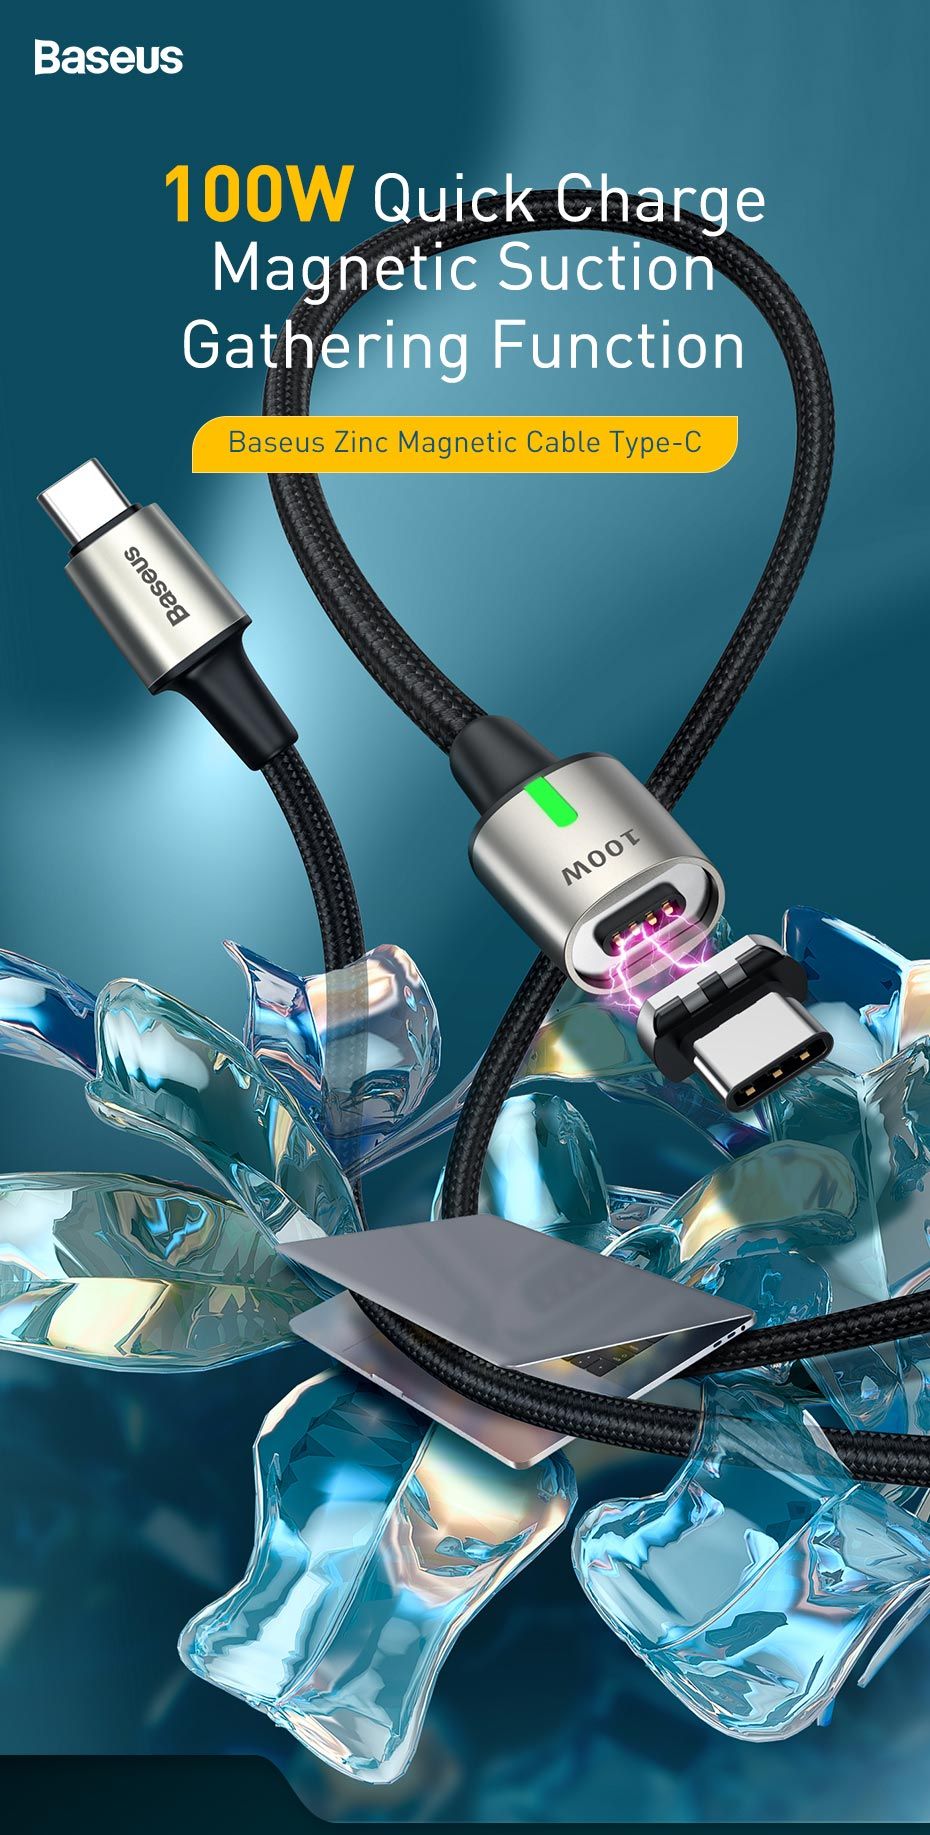 Baseus-100W-5A-Zinc-Magnetic-USB-C-to-USB-C-PD-30-Cable-Quick-Charge-Type-C-Charging-Data-Cable-Sync-1691323